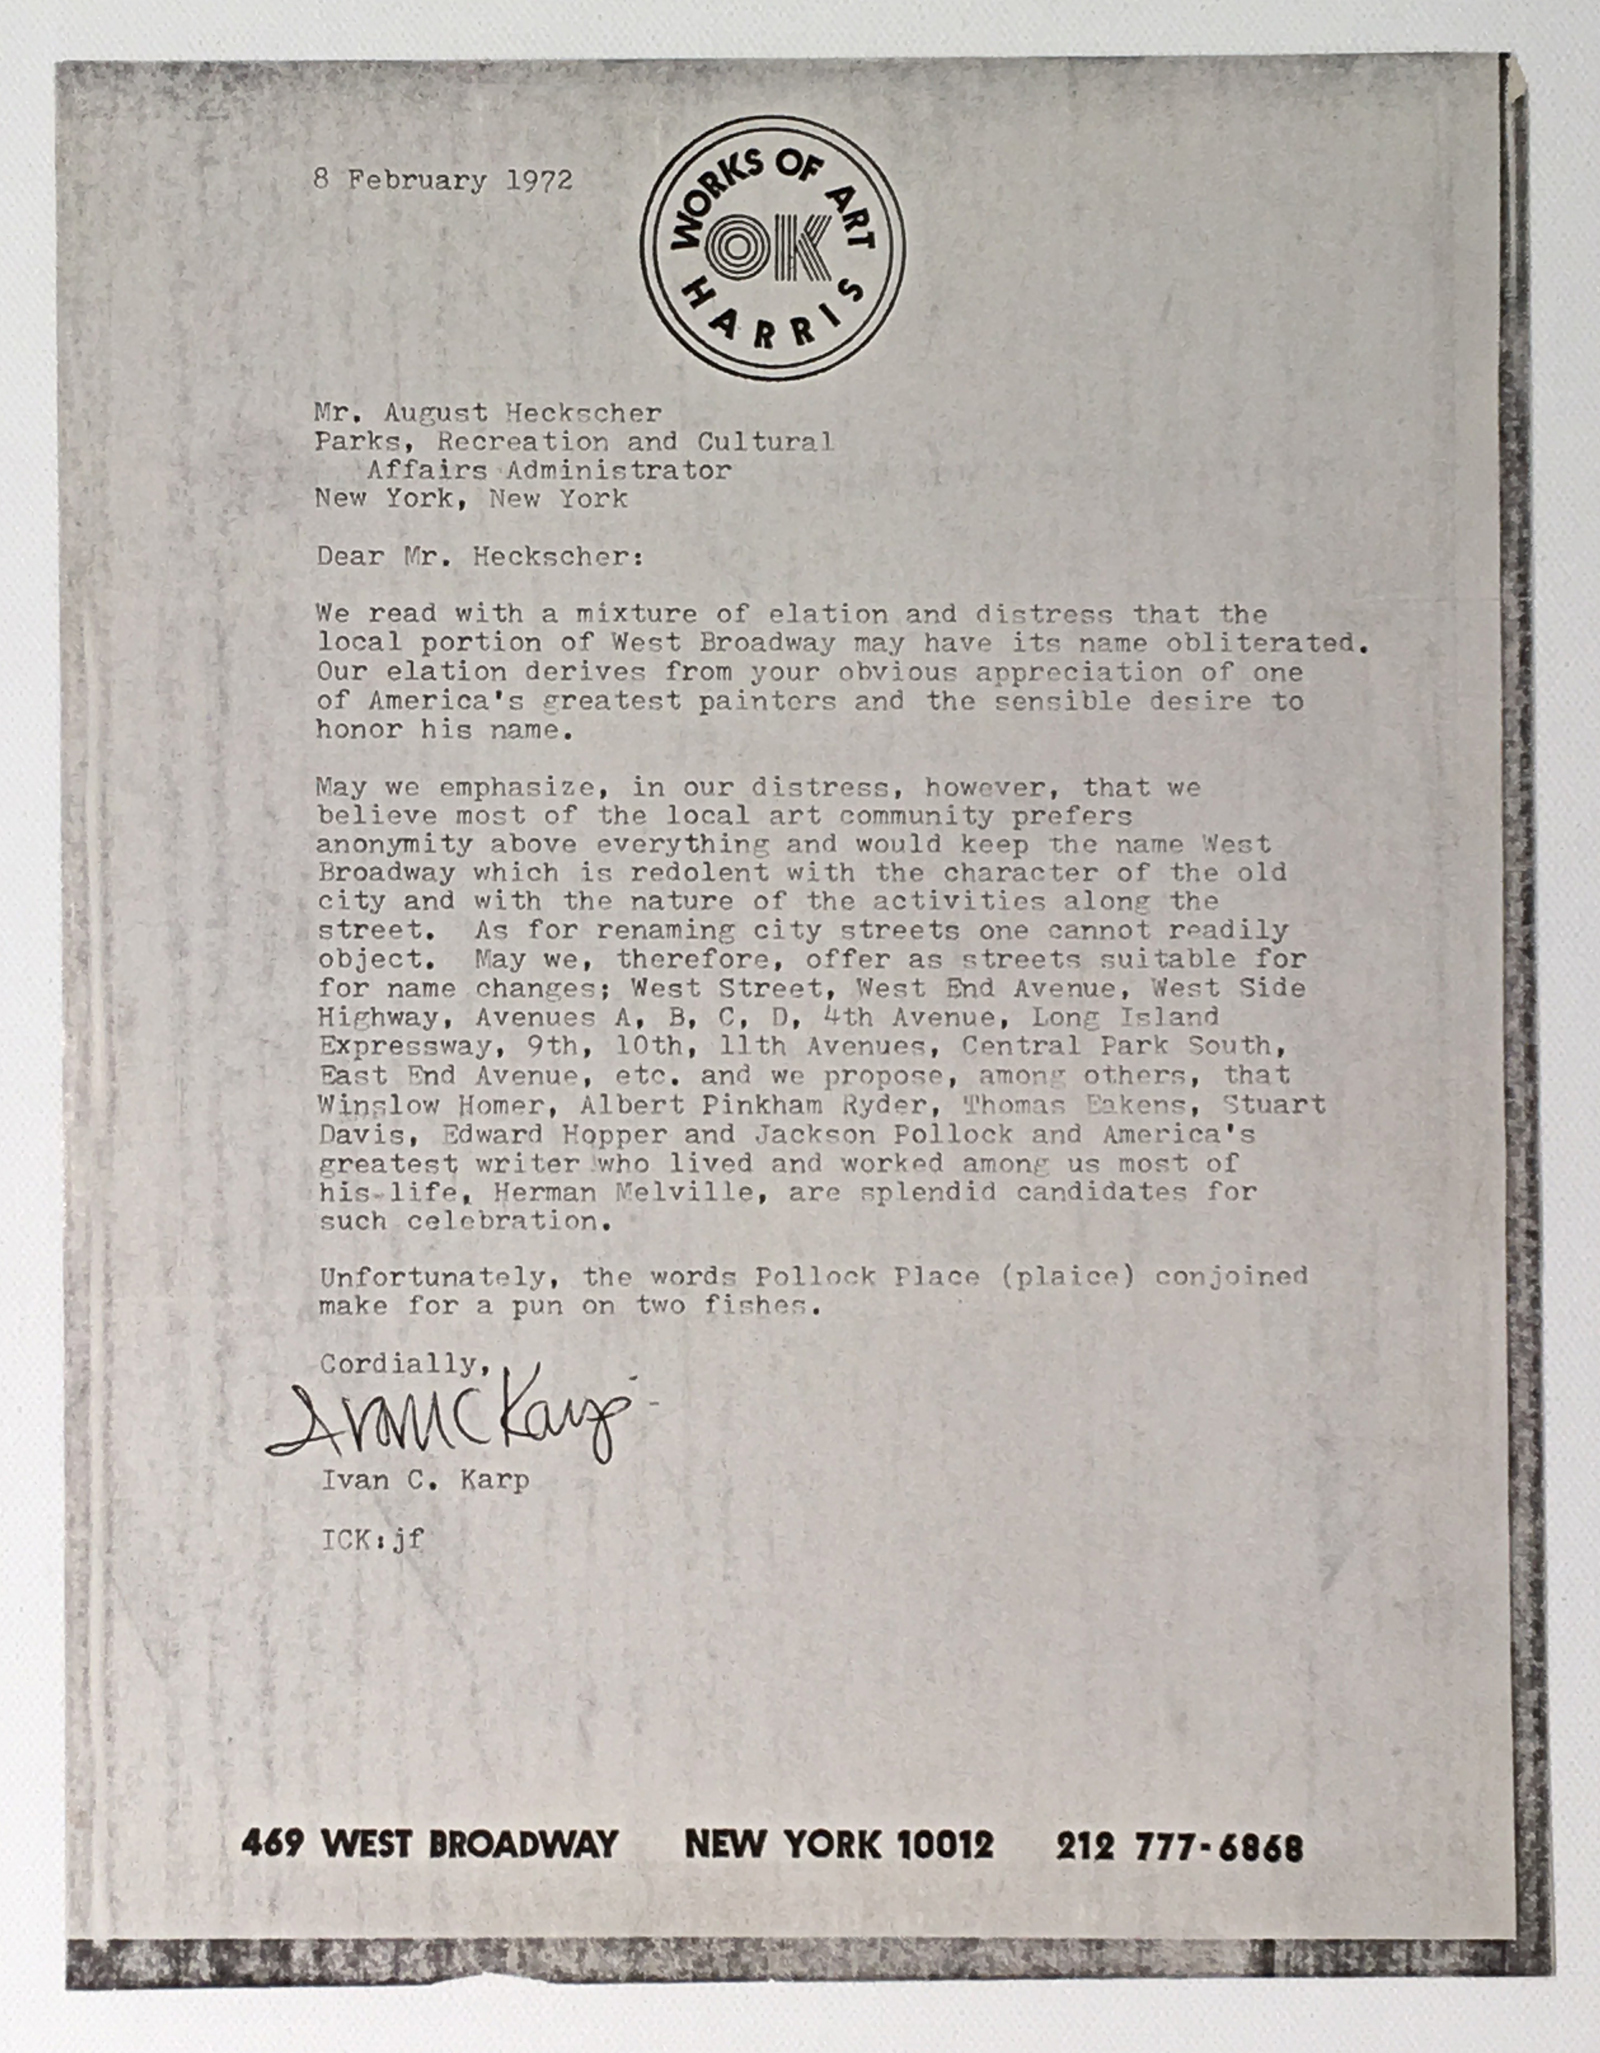 Letter from Ivan Karp about Renaming West Broadway Jackson Pollock Place (1972)